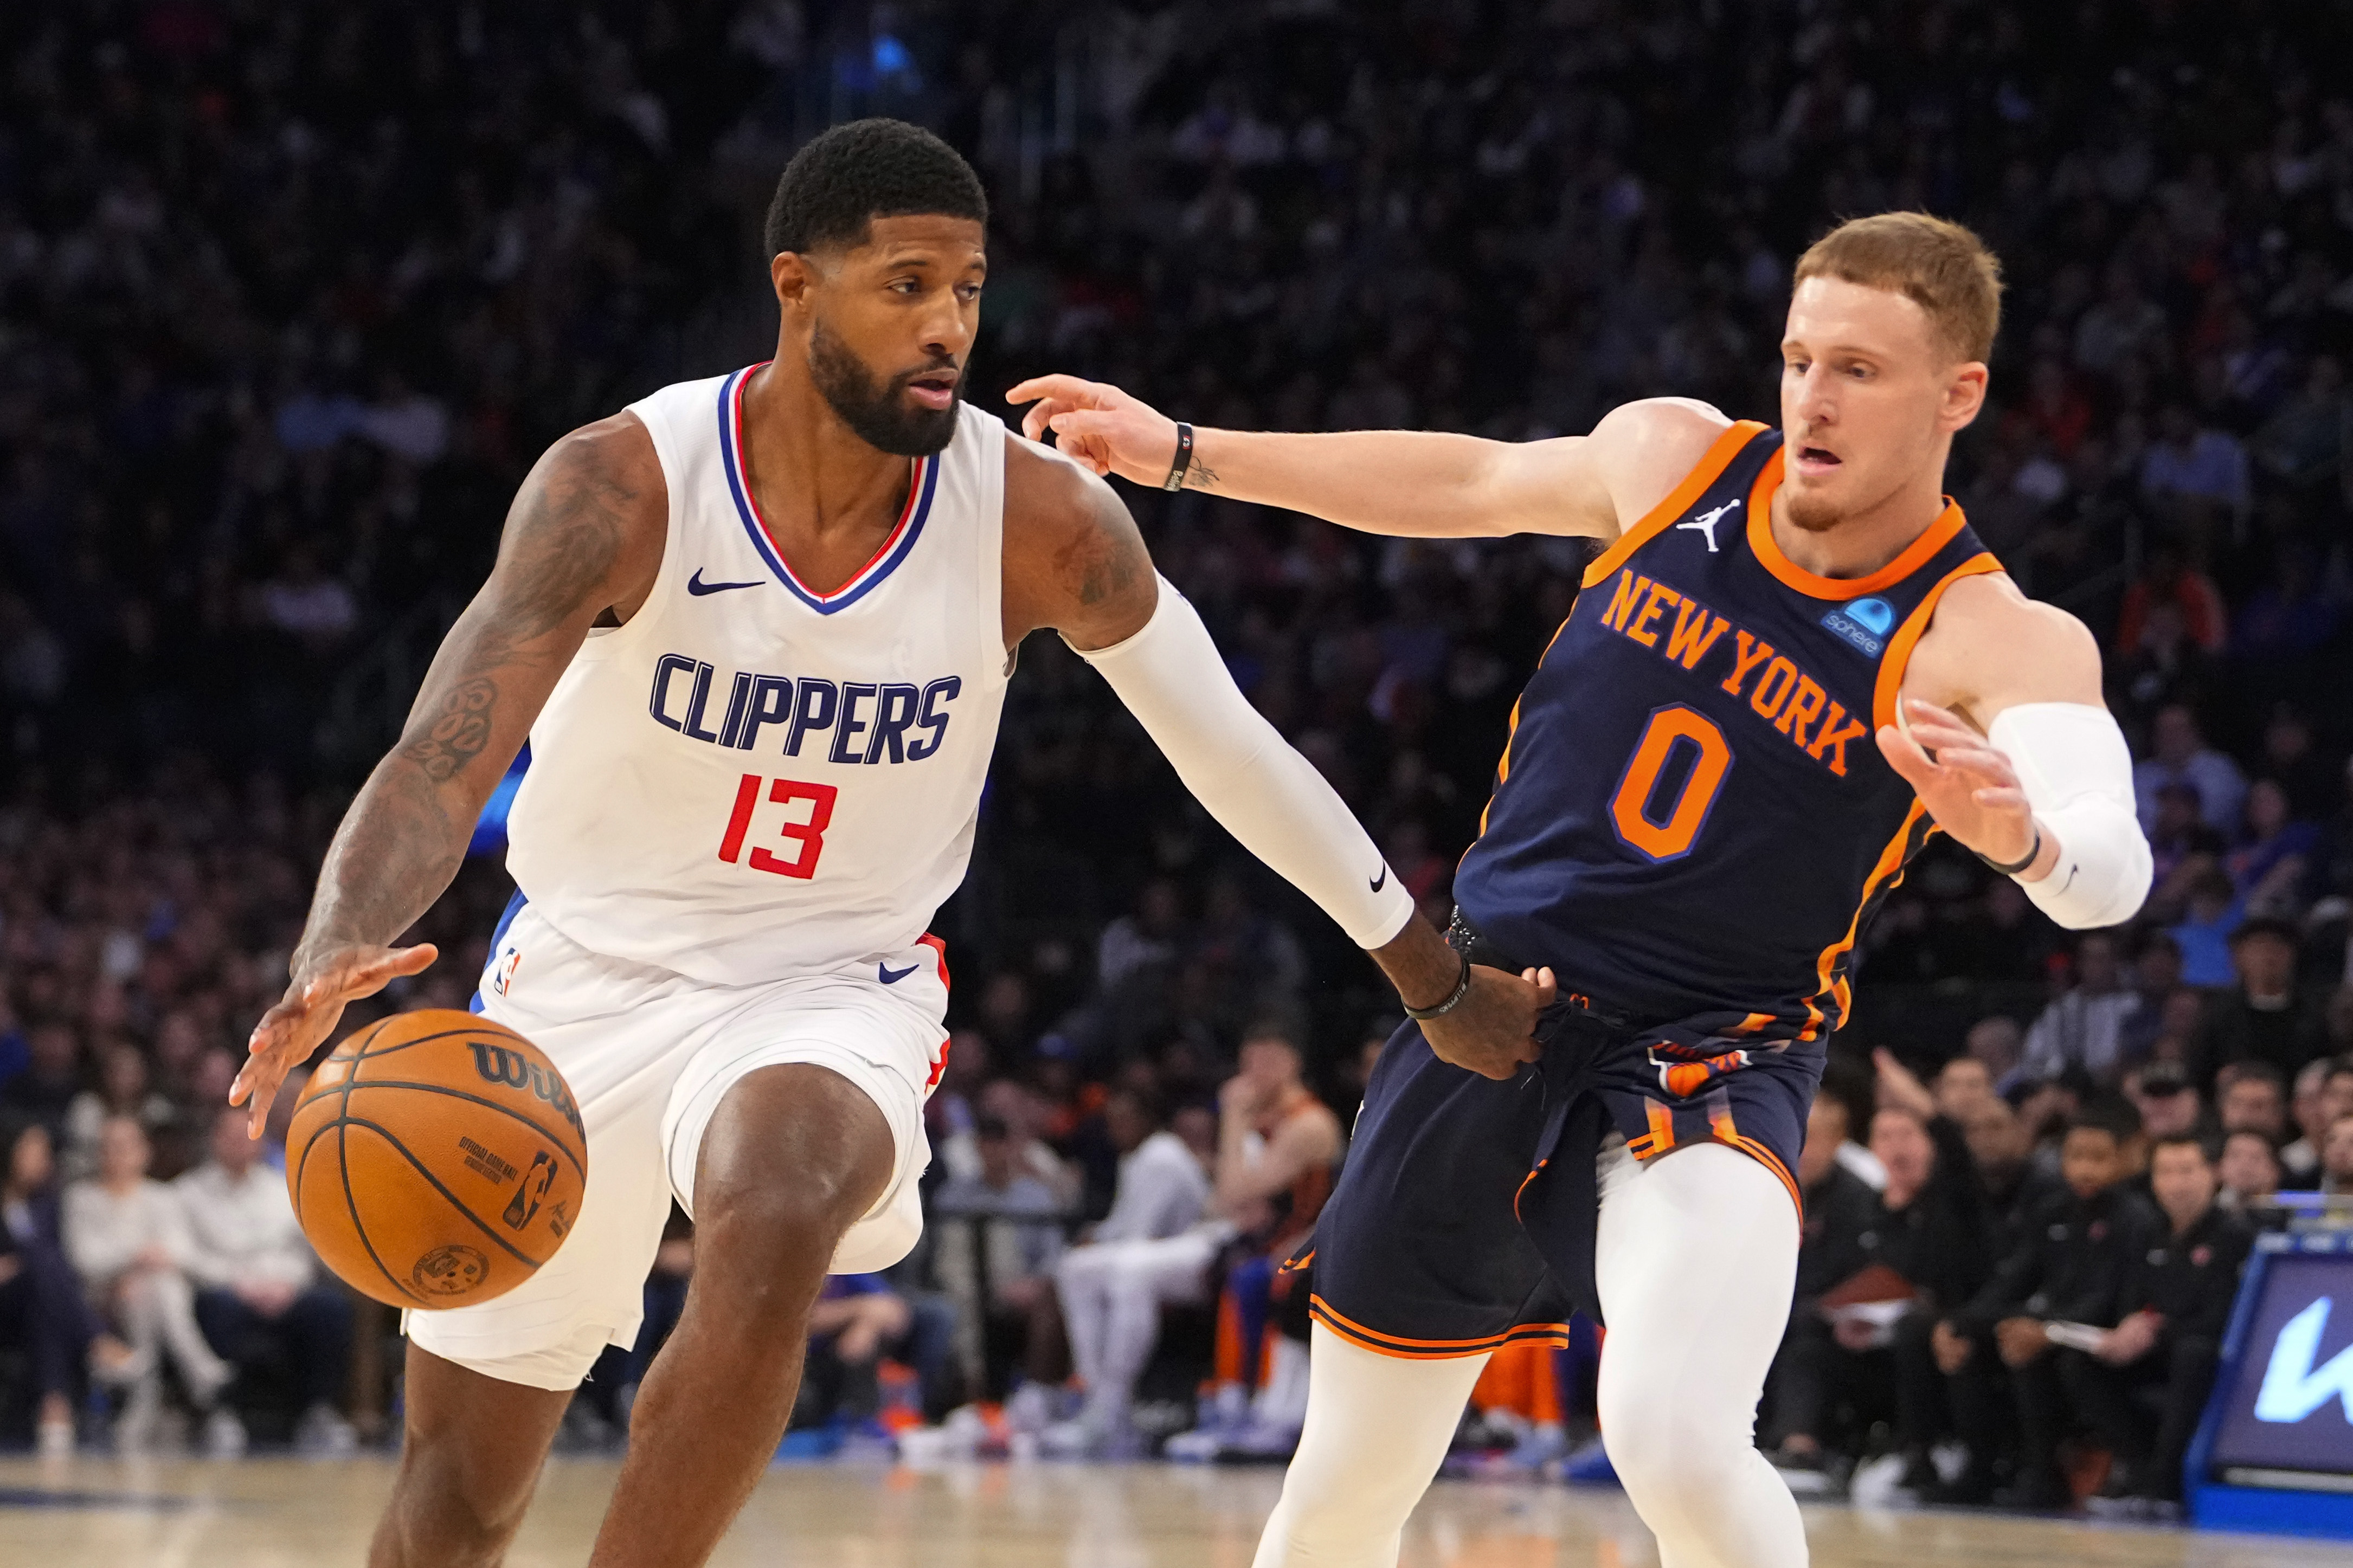 Los Angeles Clipper forward Paul George (13) dribbles the ball against New York Knicks shooting guard Donte DiVincenzo (0) during the fourth quarter at Madison Square Garden